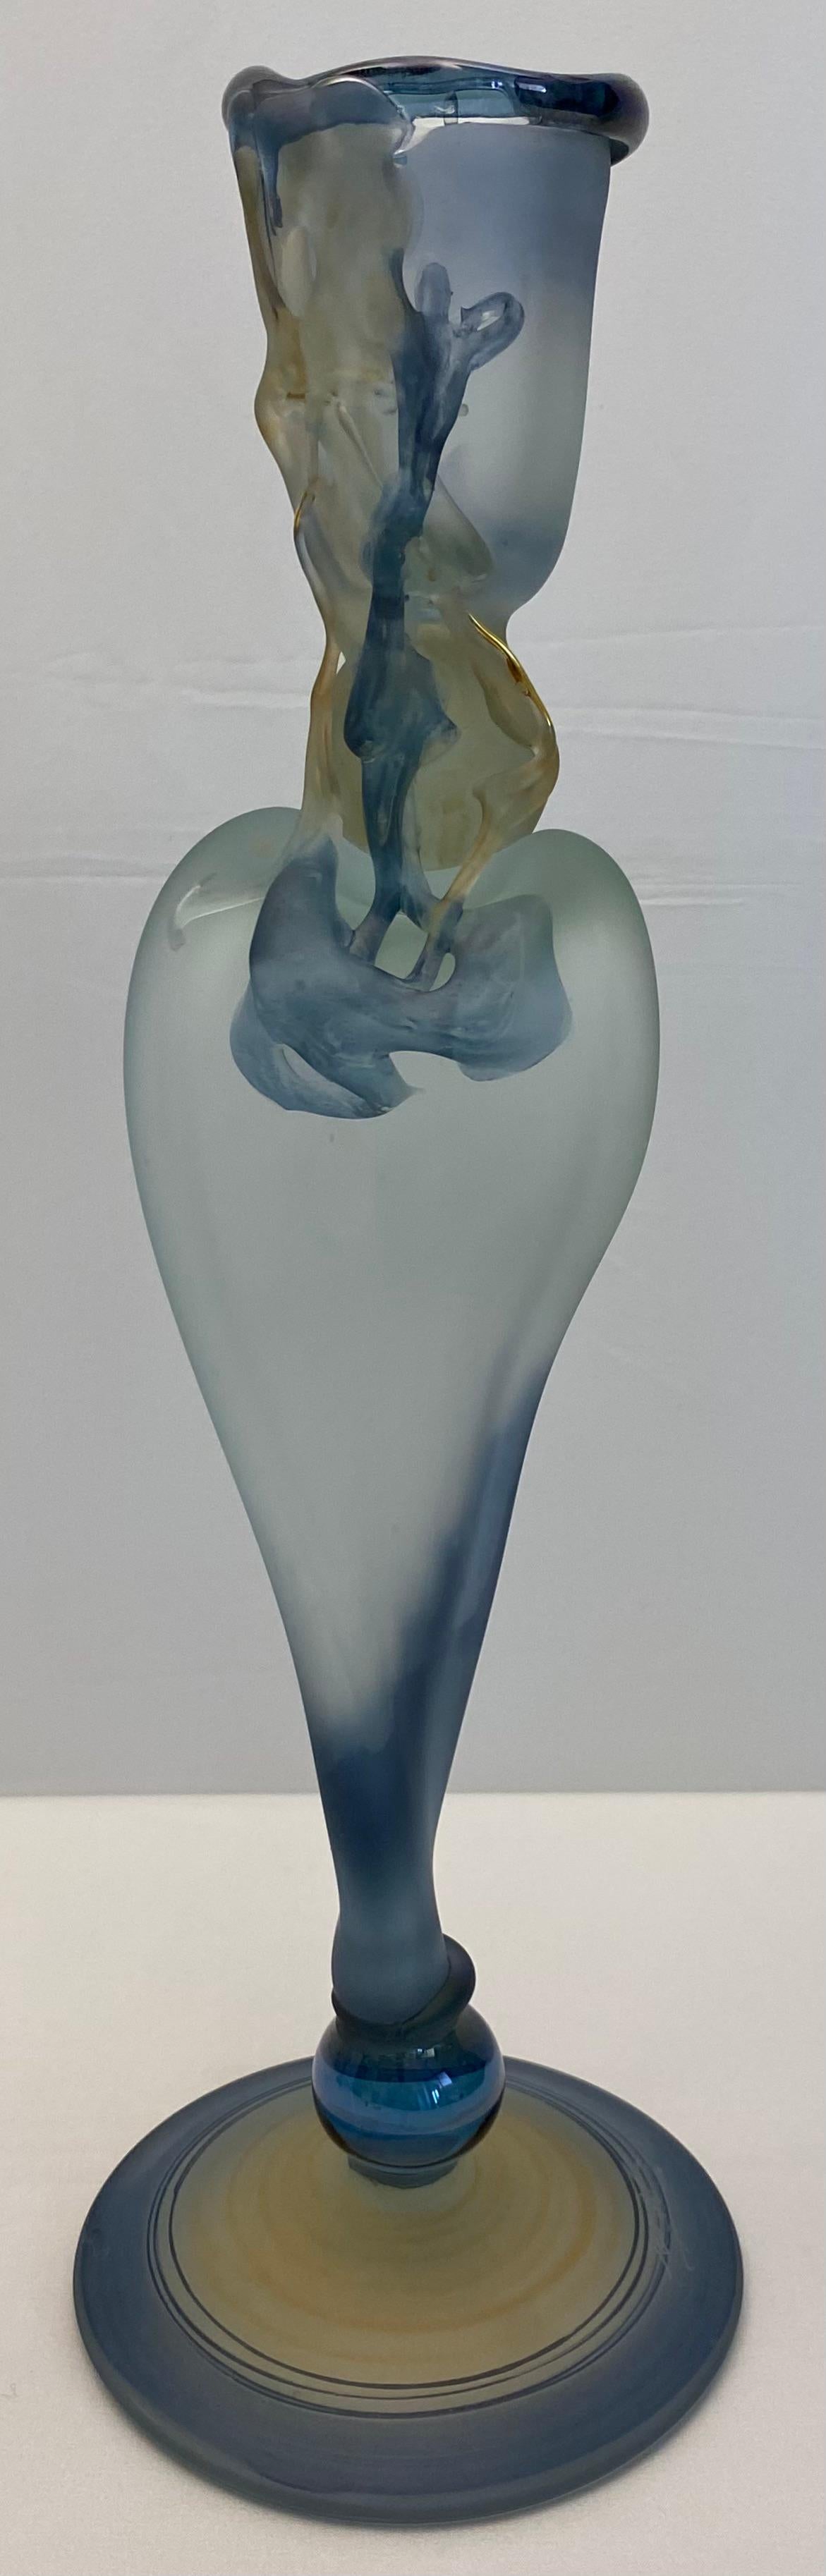 Unique Art Deco style hand-crafted, hand blown art glass stem vase. 

A beautiful and ornate Art Deco style trumpet vase, with spiral details. Perfect for a single bloom, this trumpet vase is as beautiful filled as it is empty.
Signed on the base.